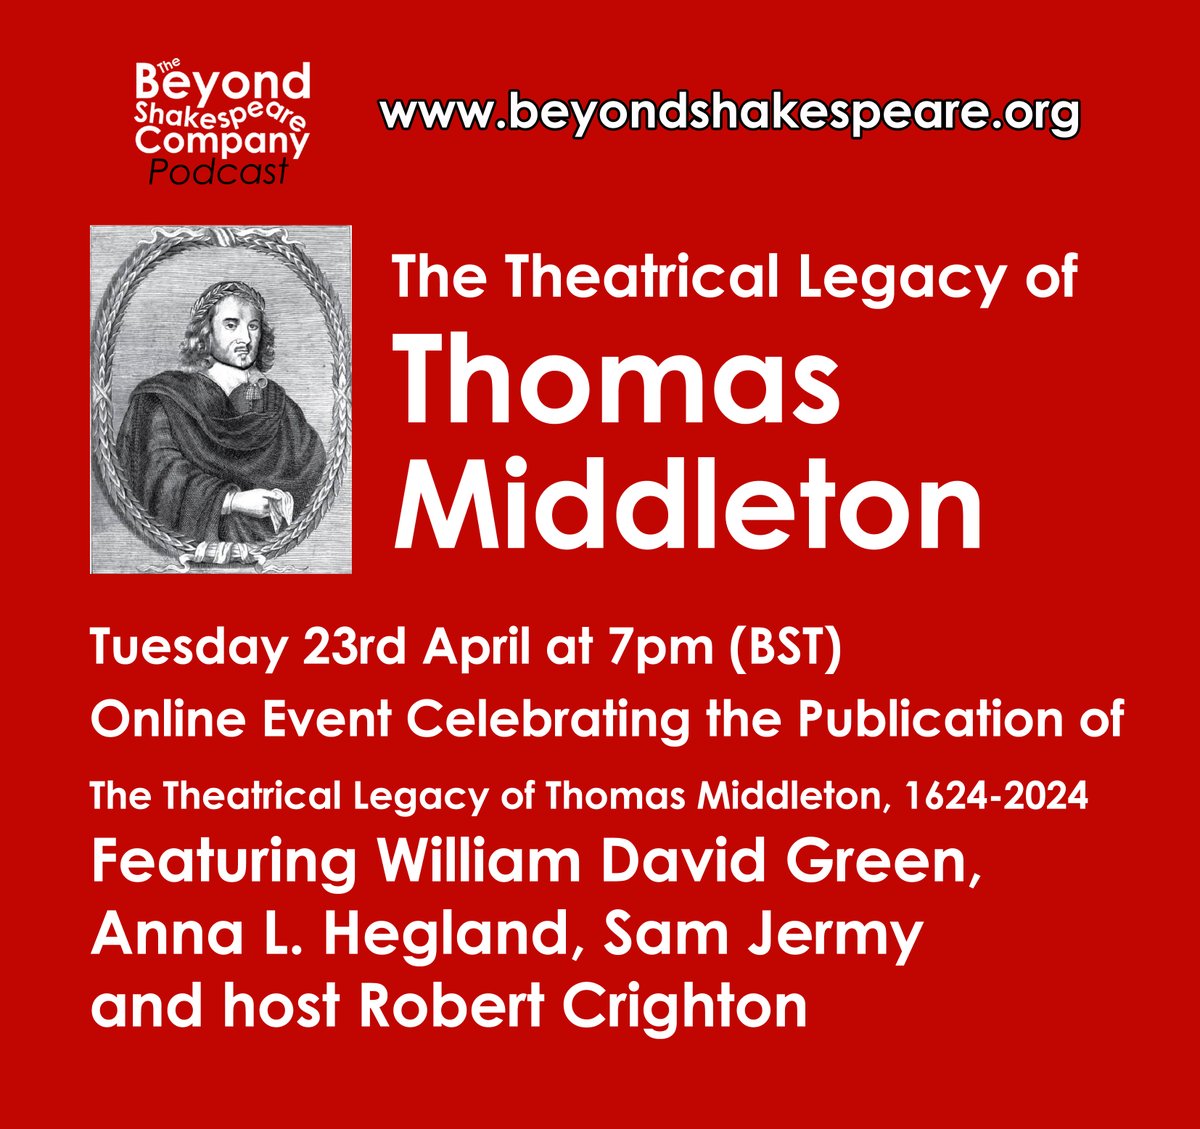 🚨Sign Up Now for our Online Event Celebrating the Publication of The Theatrical Legacy of Thomas Middleton, 1624-2024 Tues 23rd April at 7pm (BST) With William David Green, Anna L. Hegland, Sam Jermy, and host Robert Crighton beyondshakespeare.org/a-game-at-ches…